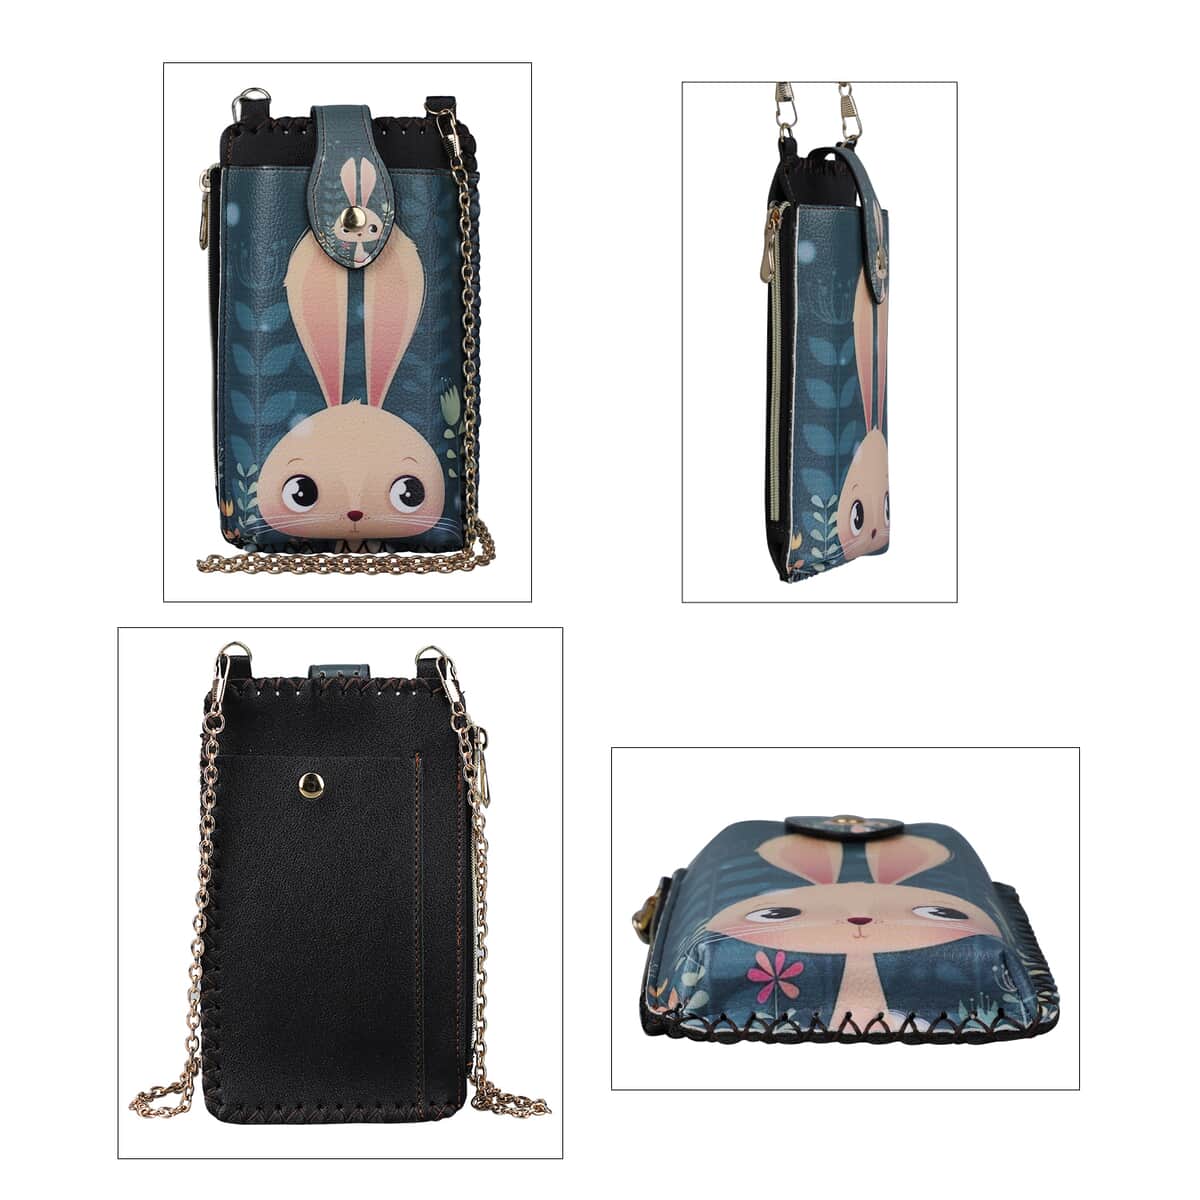 HongKong Closeout Stylish and Classic Lovely Rabbit Pattern Cell Phone Bag with Chain Shoulder Strap - Dark Teal image number 3